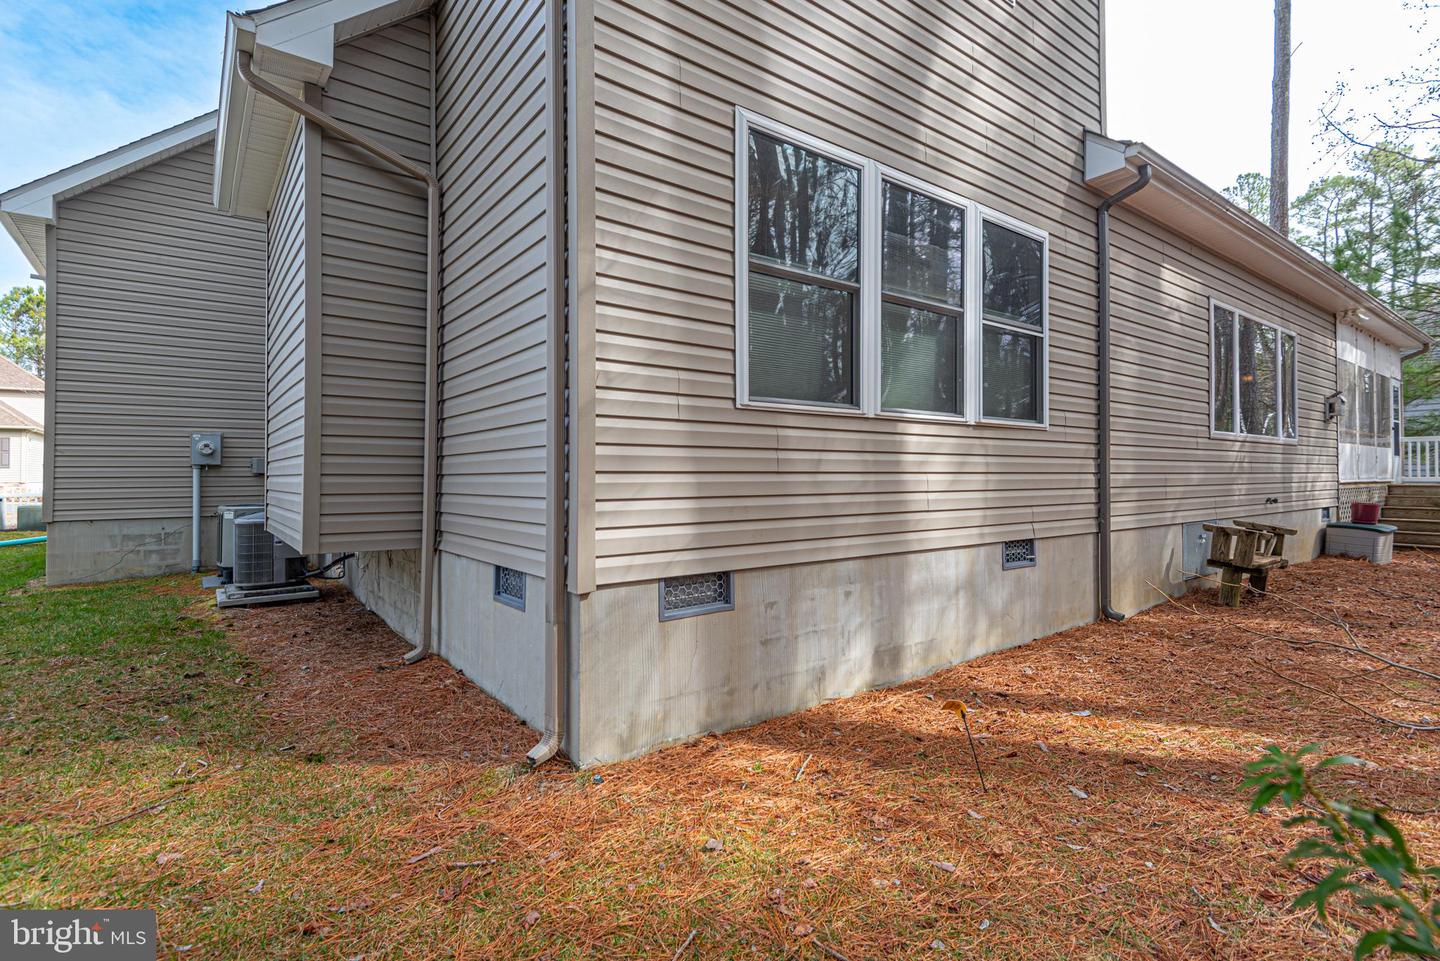 MDWO2019426-802904008036-2024-03-08-00-14-48 106 Pine Forest Dr | Berlin, MD Real Estate For Sale | MLS# Mdwo2019426  - 1st Choice Properties